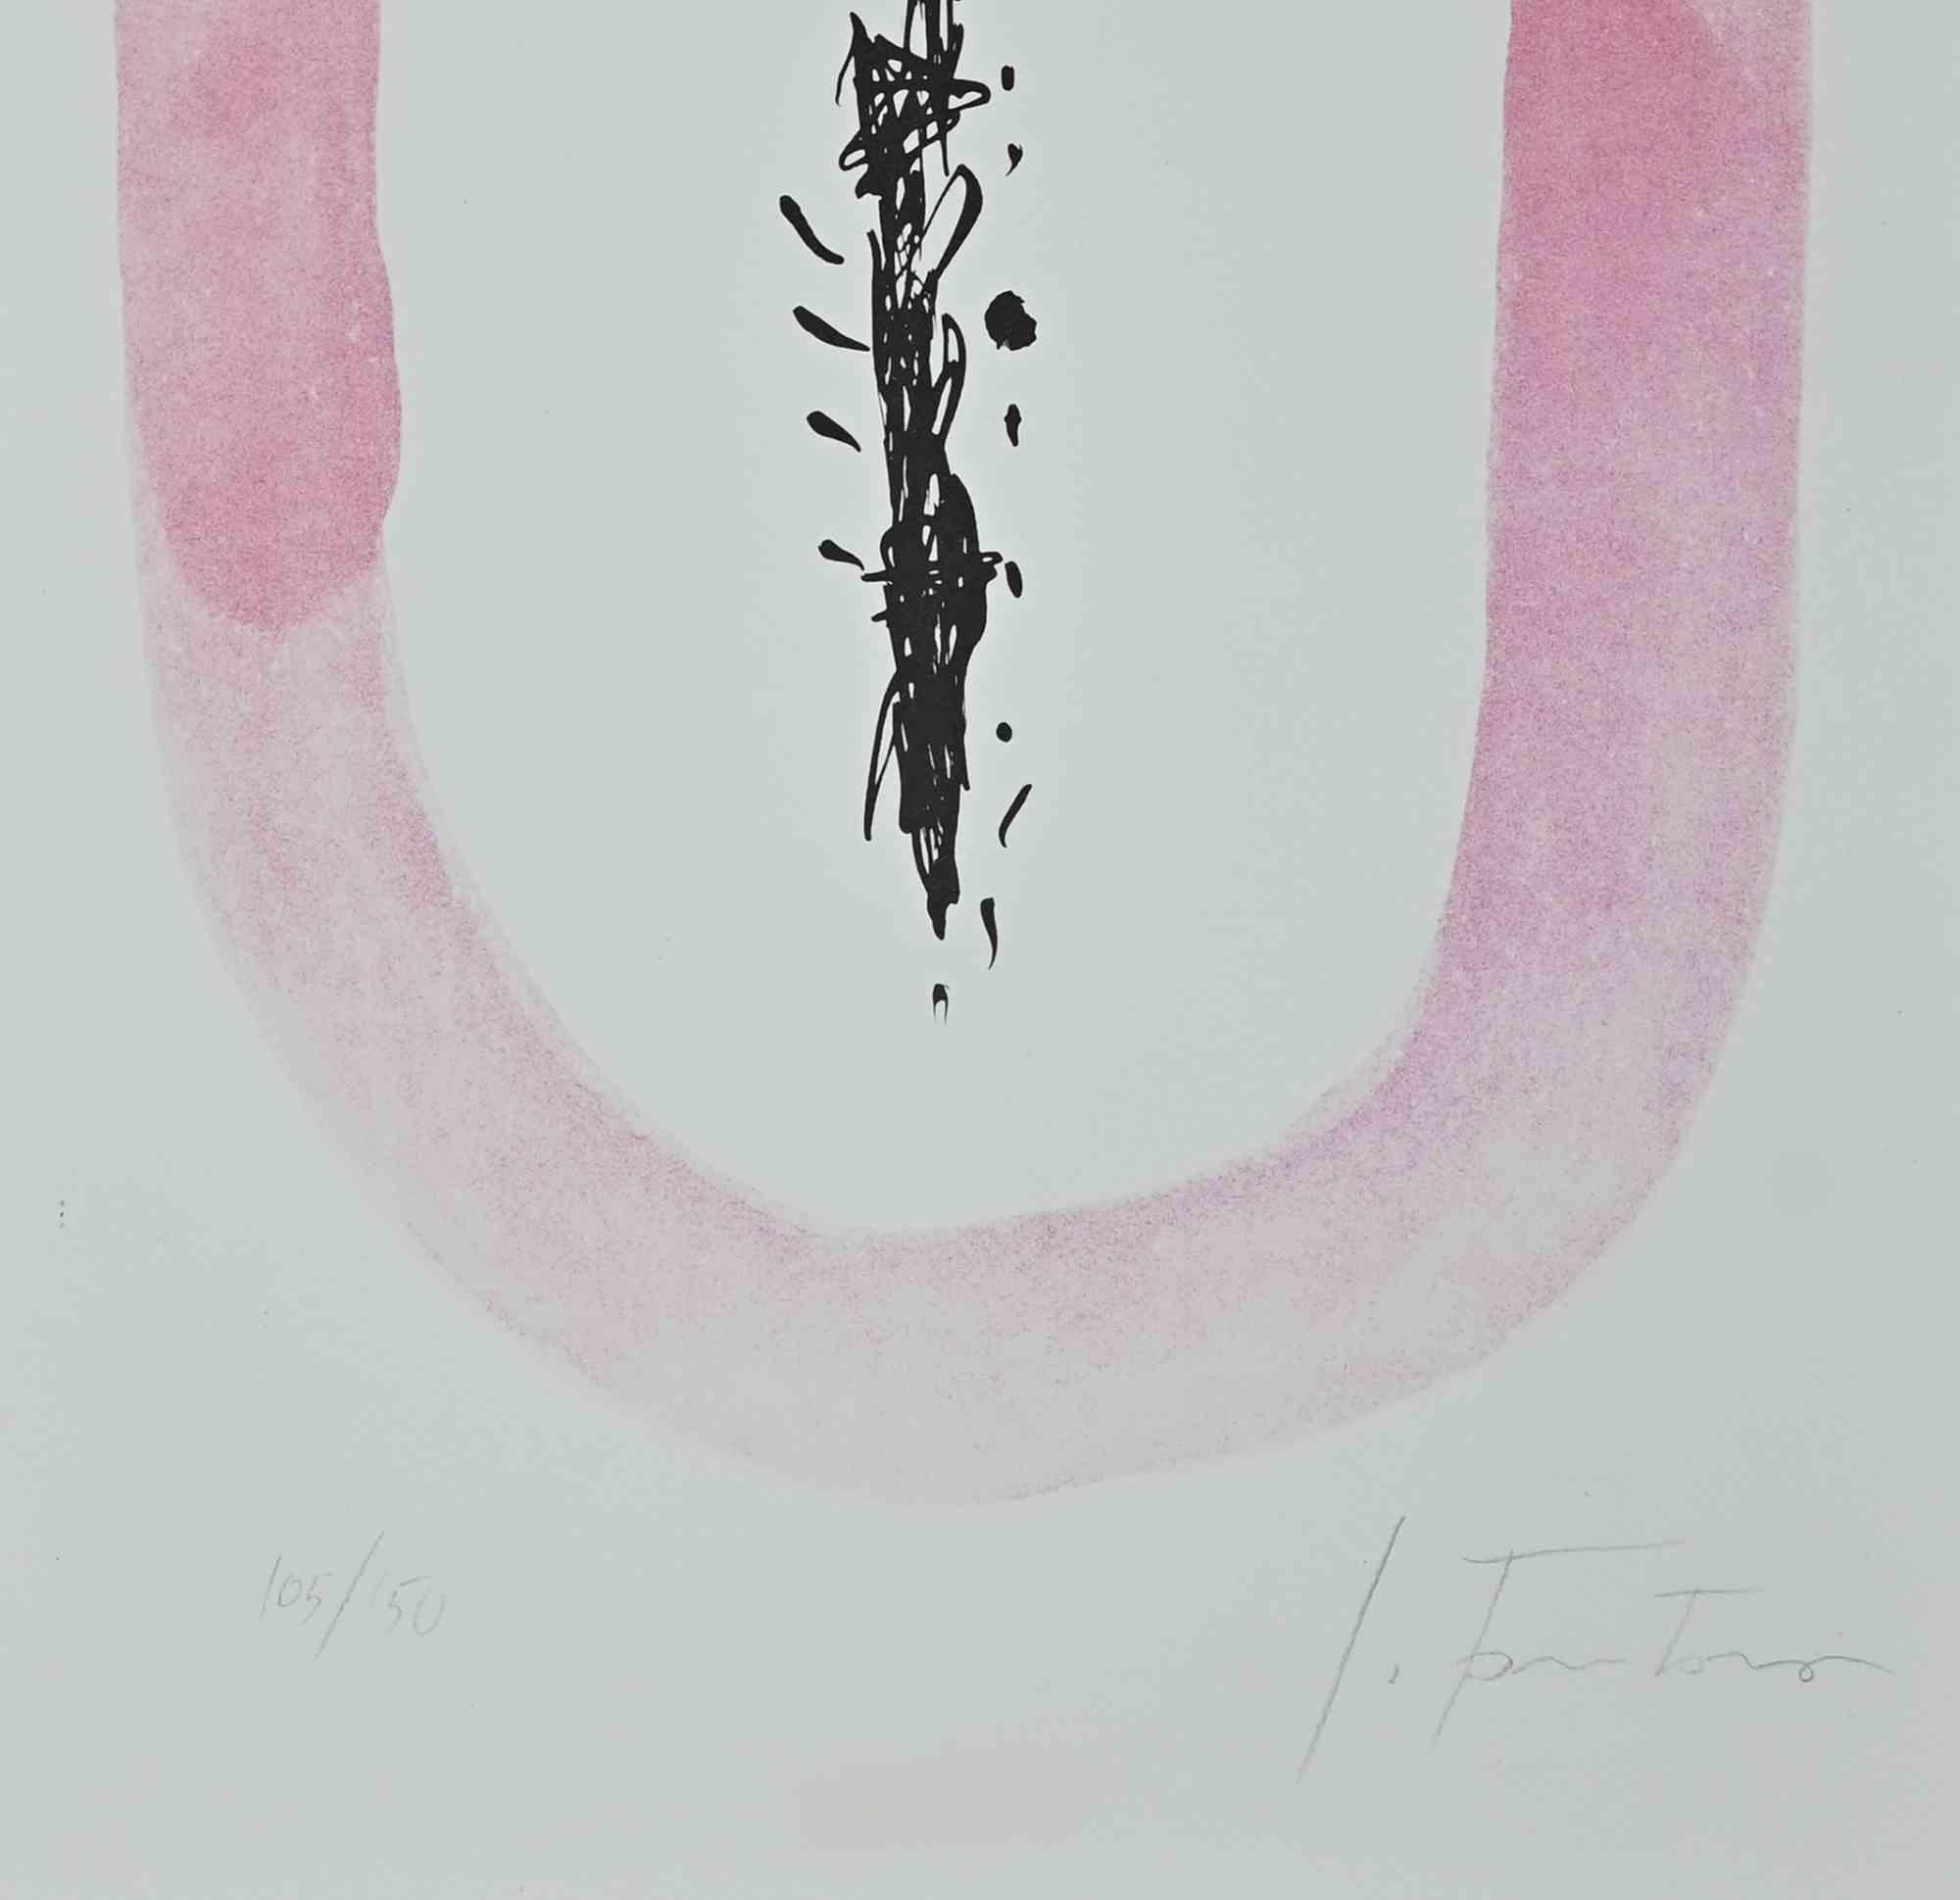 Untitled is an original contemporary artwork realized by Lucio Fontana in 1963.

Mixed colored photolithograph.

Hand signed in pencil by the artist on the lower right margin.

Numbered on the lower left. Edition of 105/150

This is an edition of